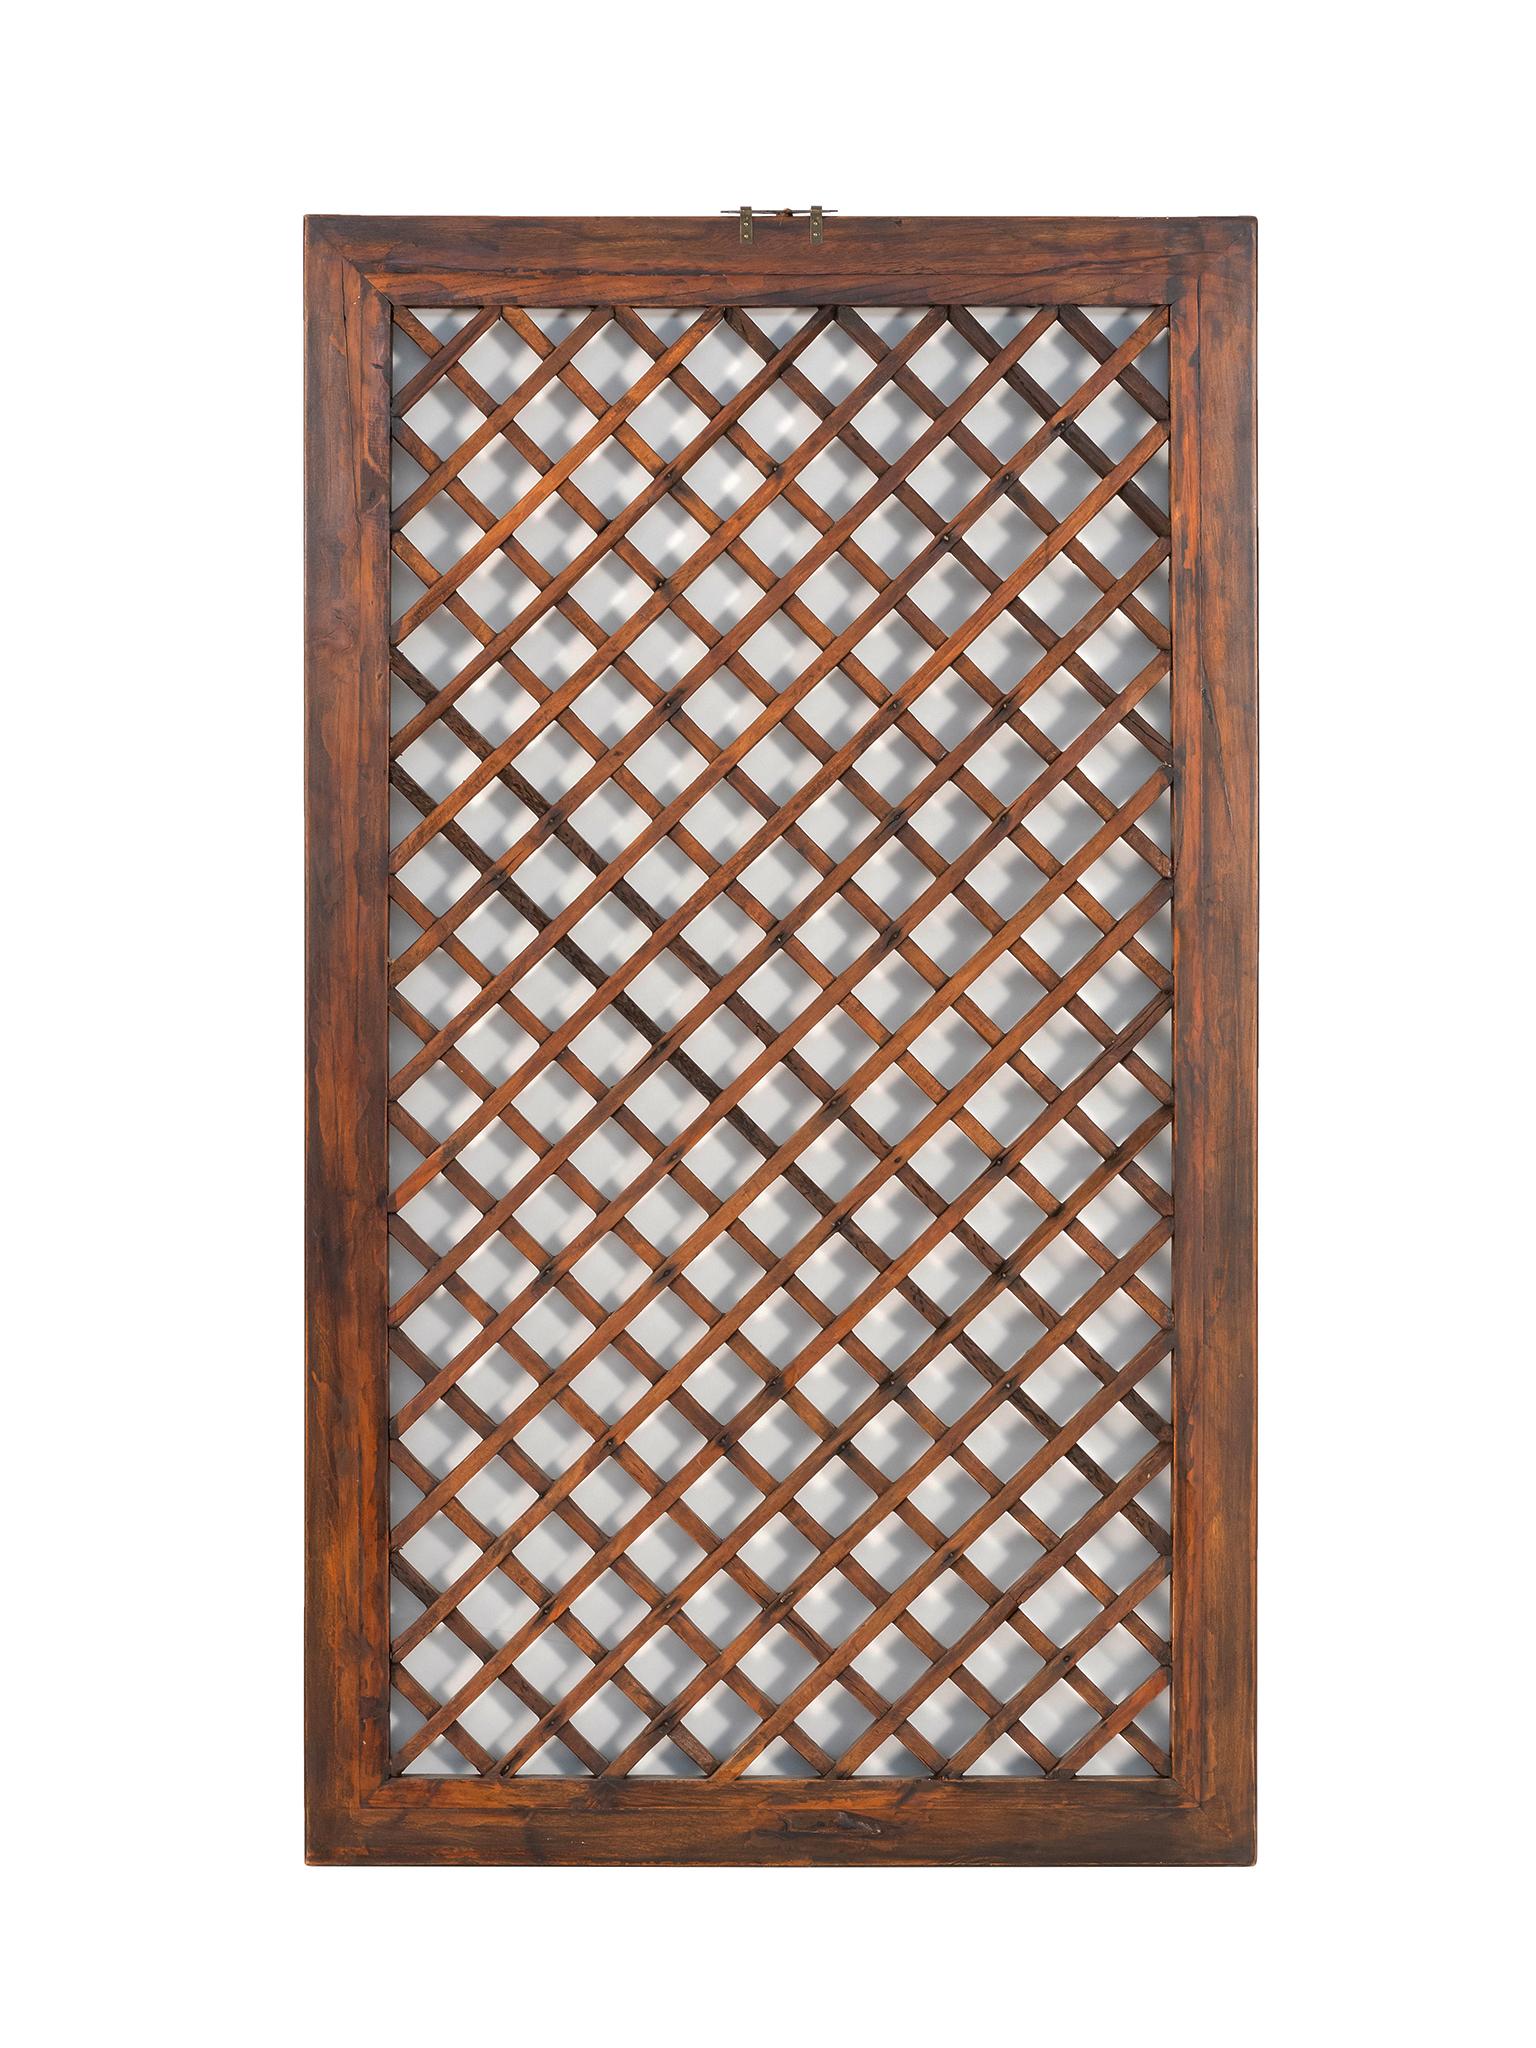 A beautiful Chinese screen, early 20th century. Crafted from rosewood with a rich, honey red-brown tone. The openwork design is an elegant lattice pattern with an ogee frame. This screen is well-aged giving the wood character and a warm quality. A